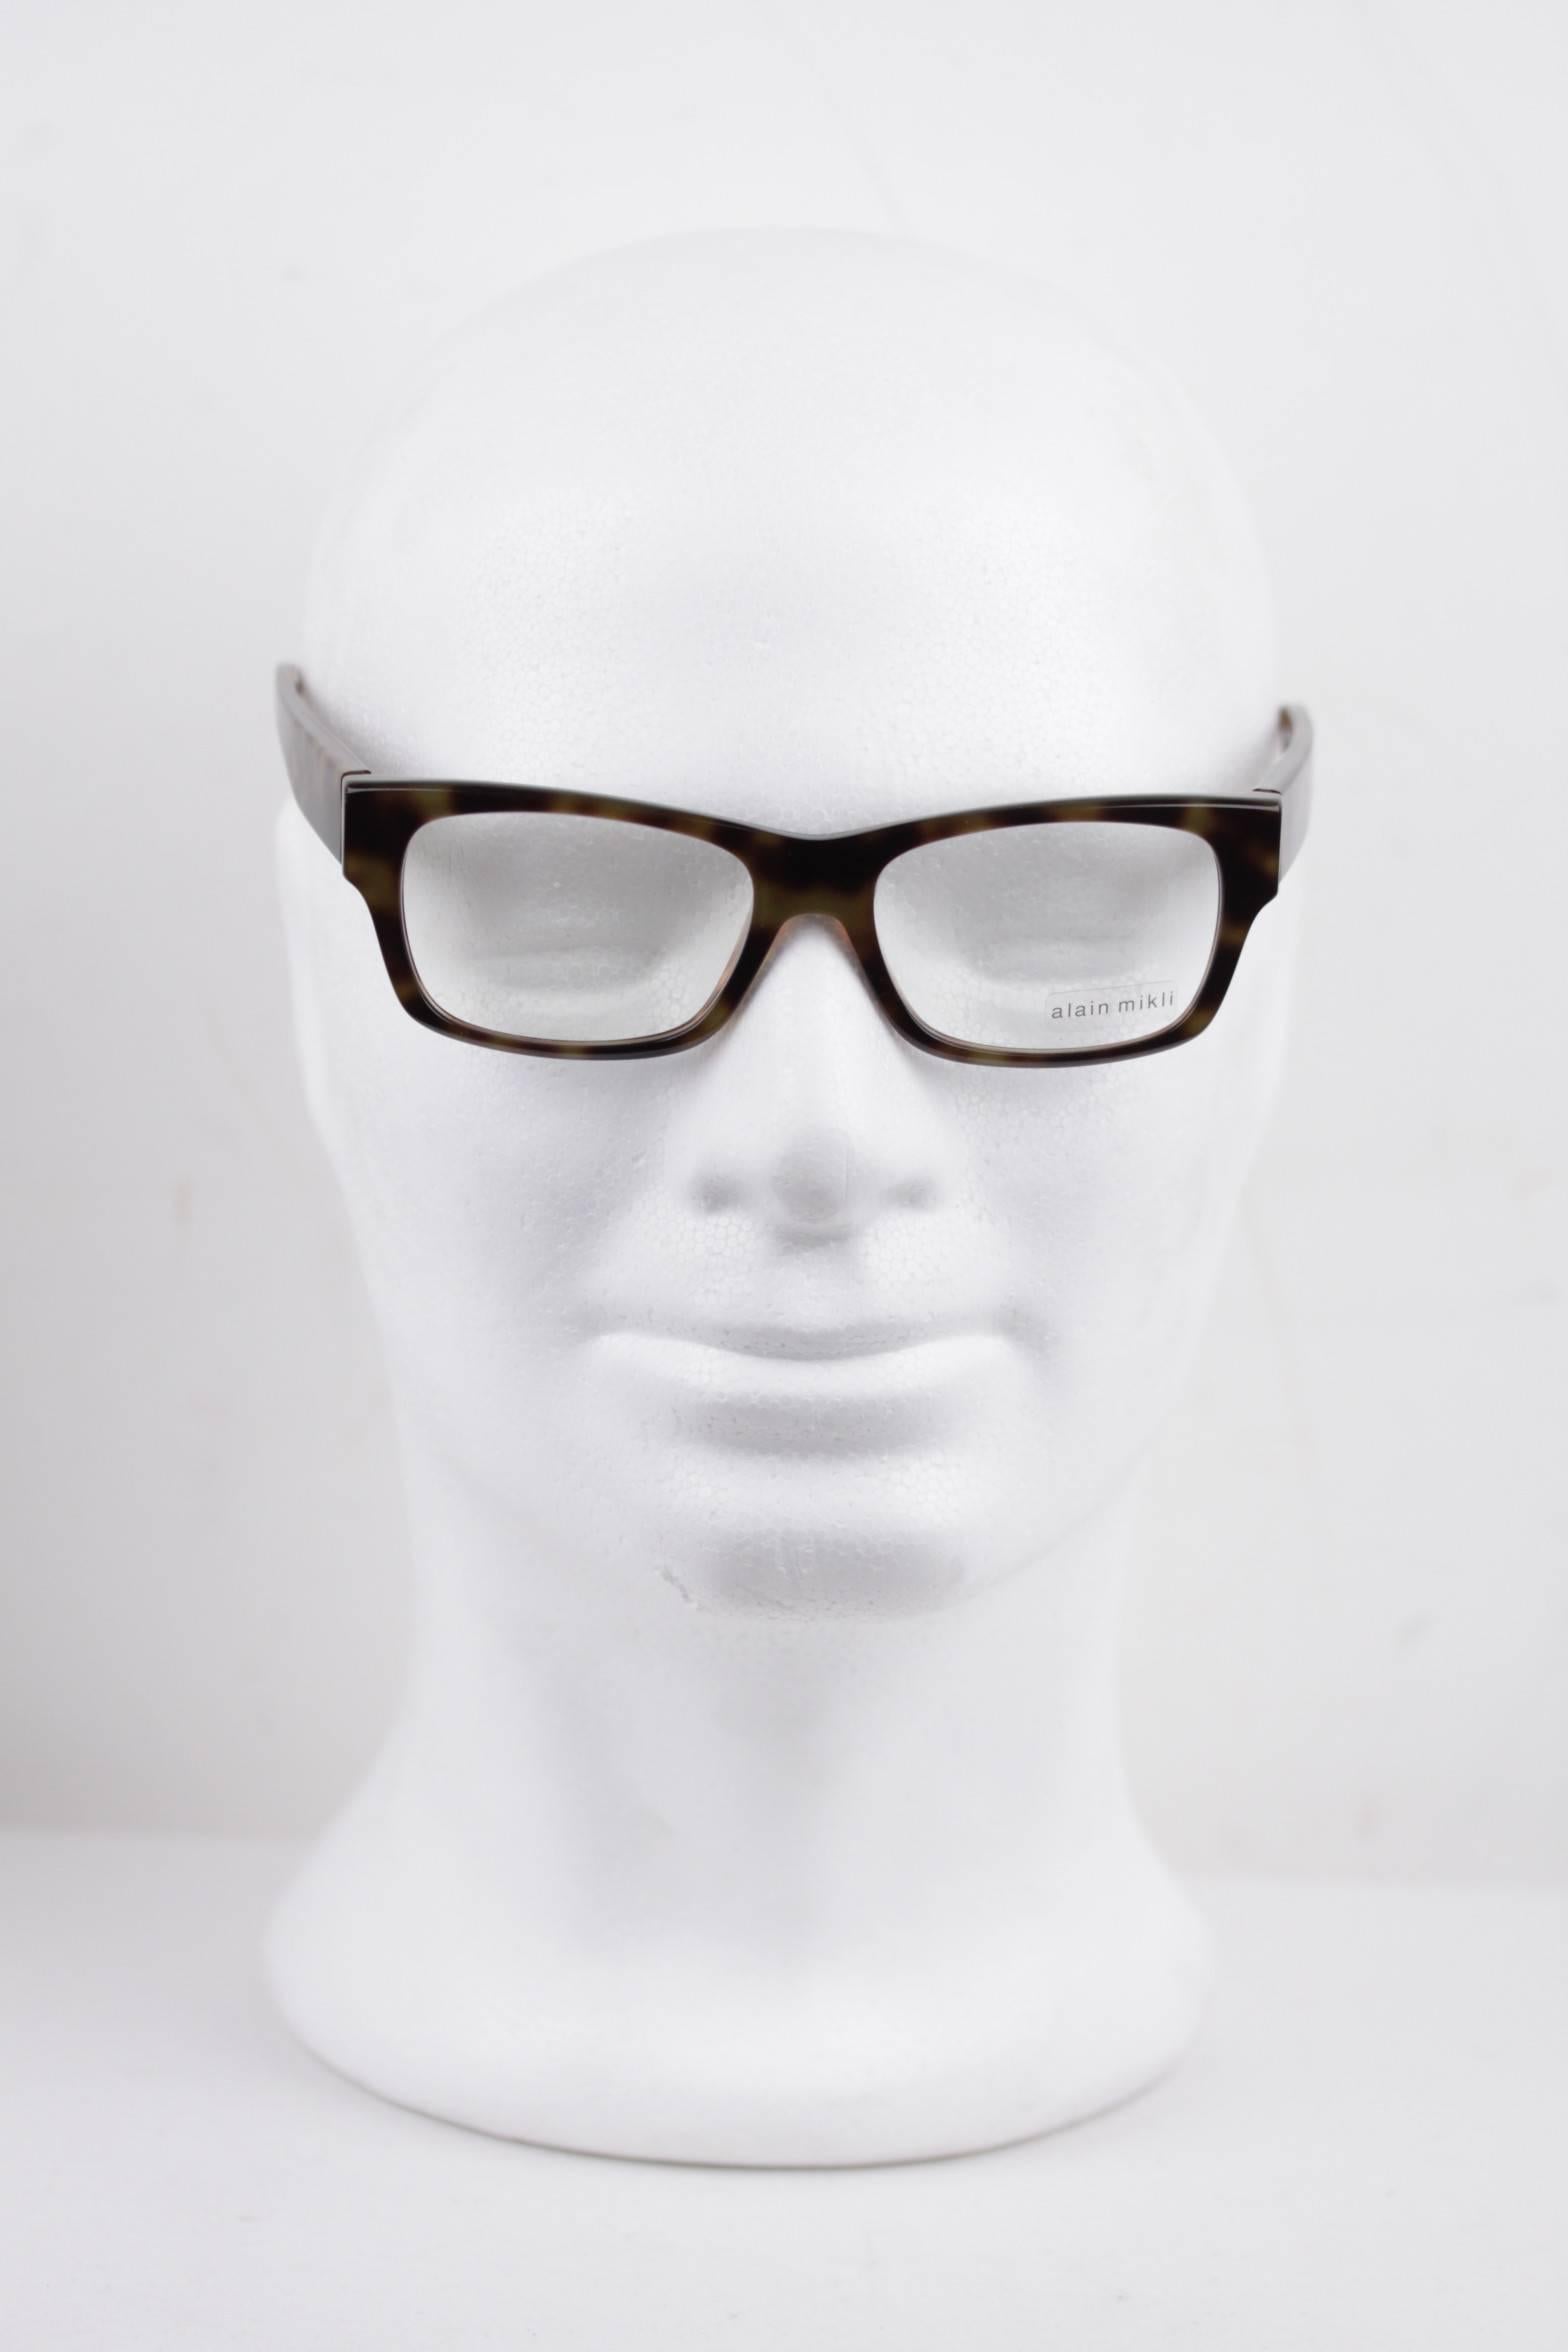 ALAIN MIKLI tortoise brown EYEGLASSES A01320 B0H5 53/17 145 Frame FLEX HINGES MY In New Condition In Rome, Rome